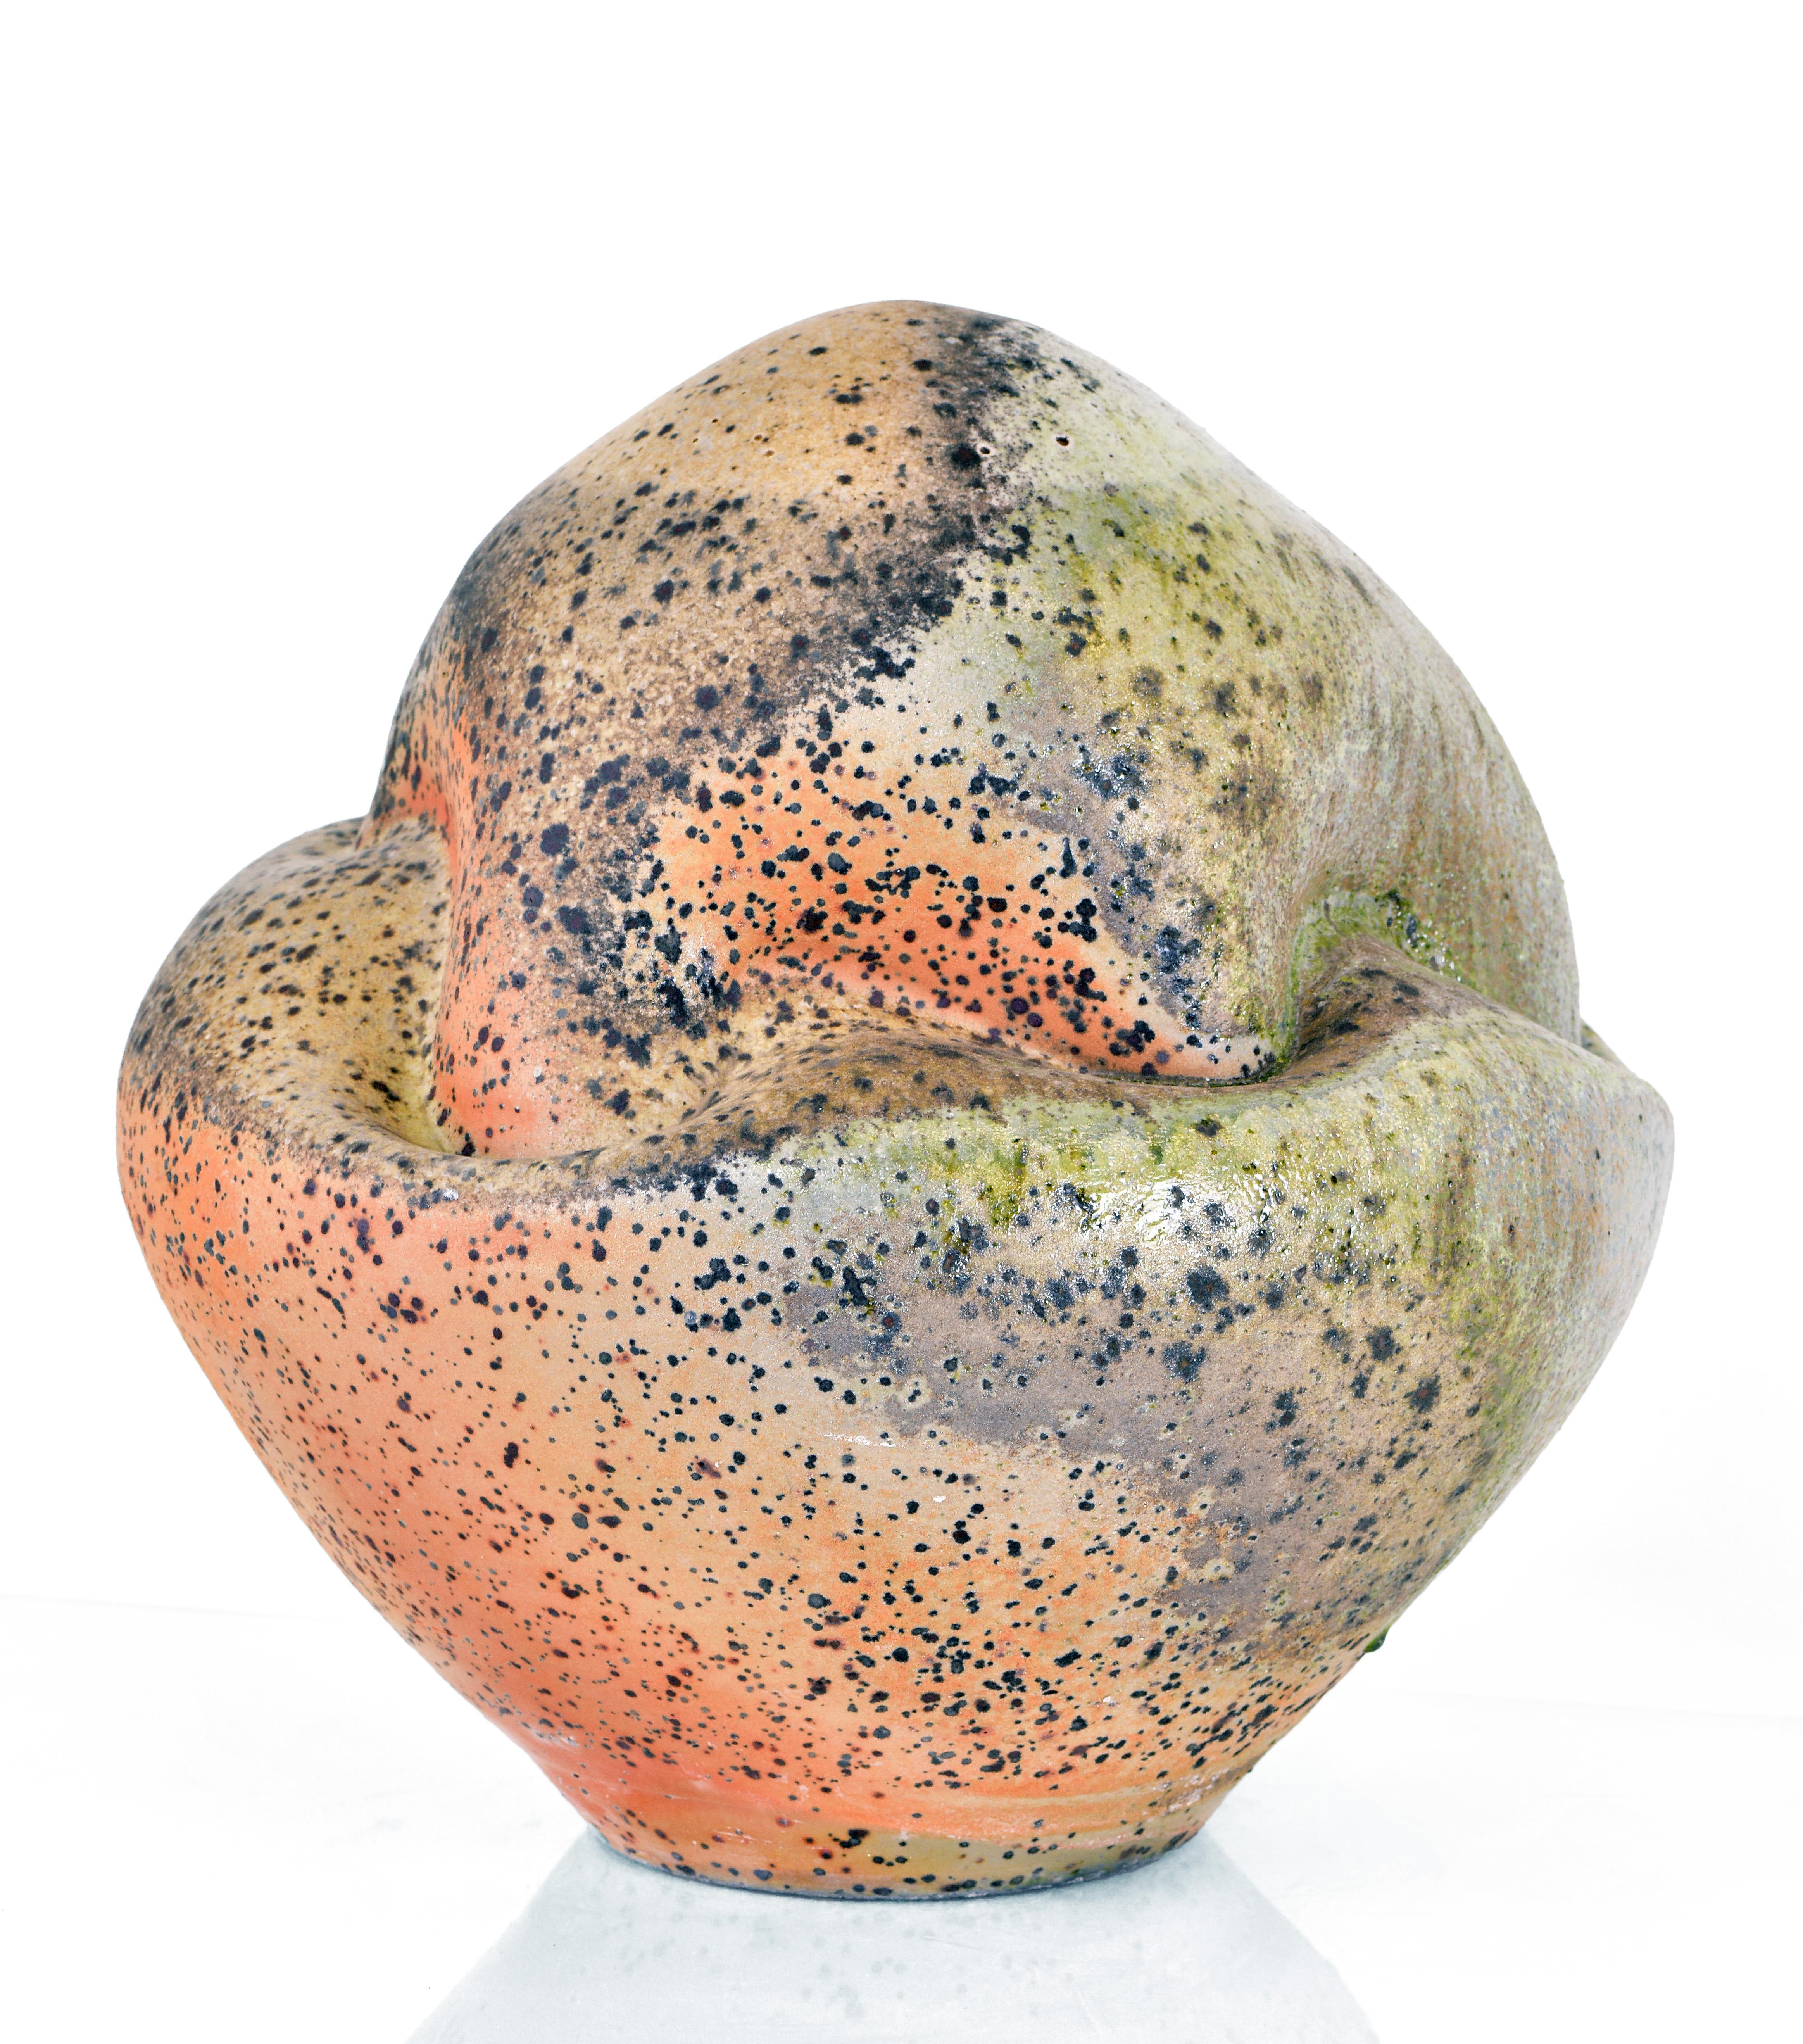 Perry Haas Abstract Sculpture - Porcelain, Sculpture, Contemporary, Design, Glaze, Iron Particles, Closed Form